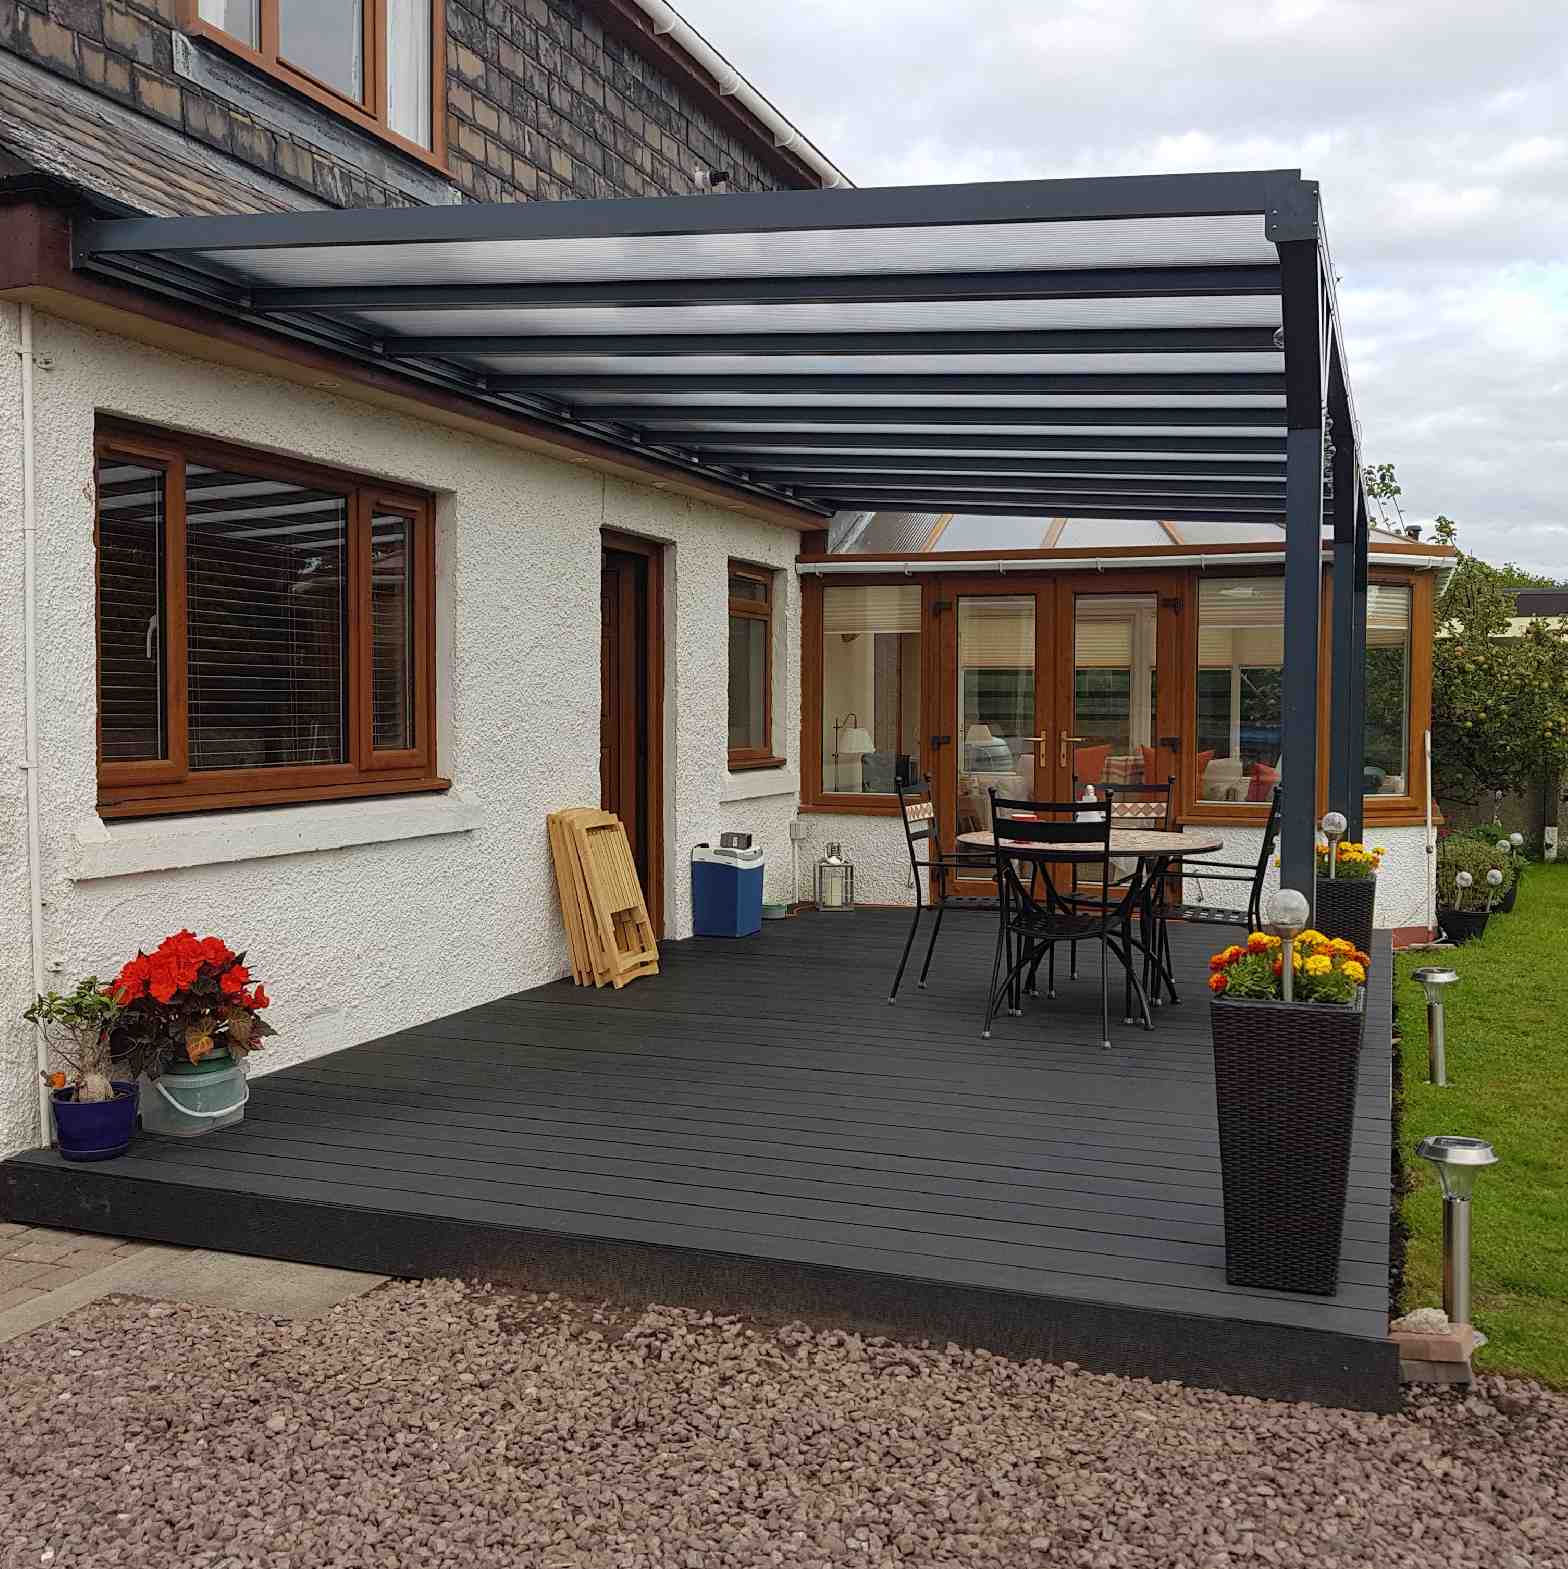 Buy Omega Verandah, Anthracite Grey, 16mm Polycarbonate Glazing - 7.4m (W) x 4.5m (P), (4) Supporting Posts online today